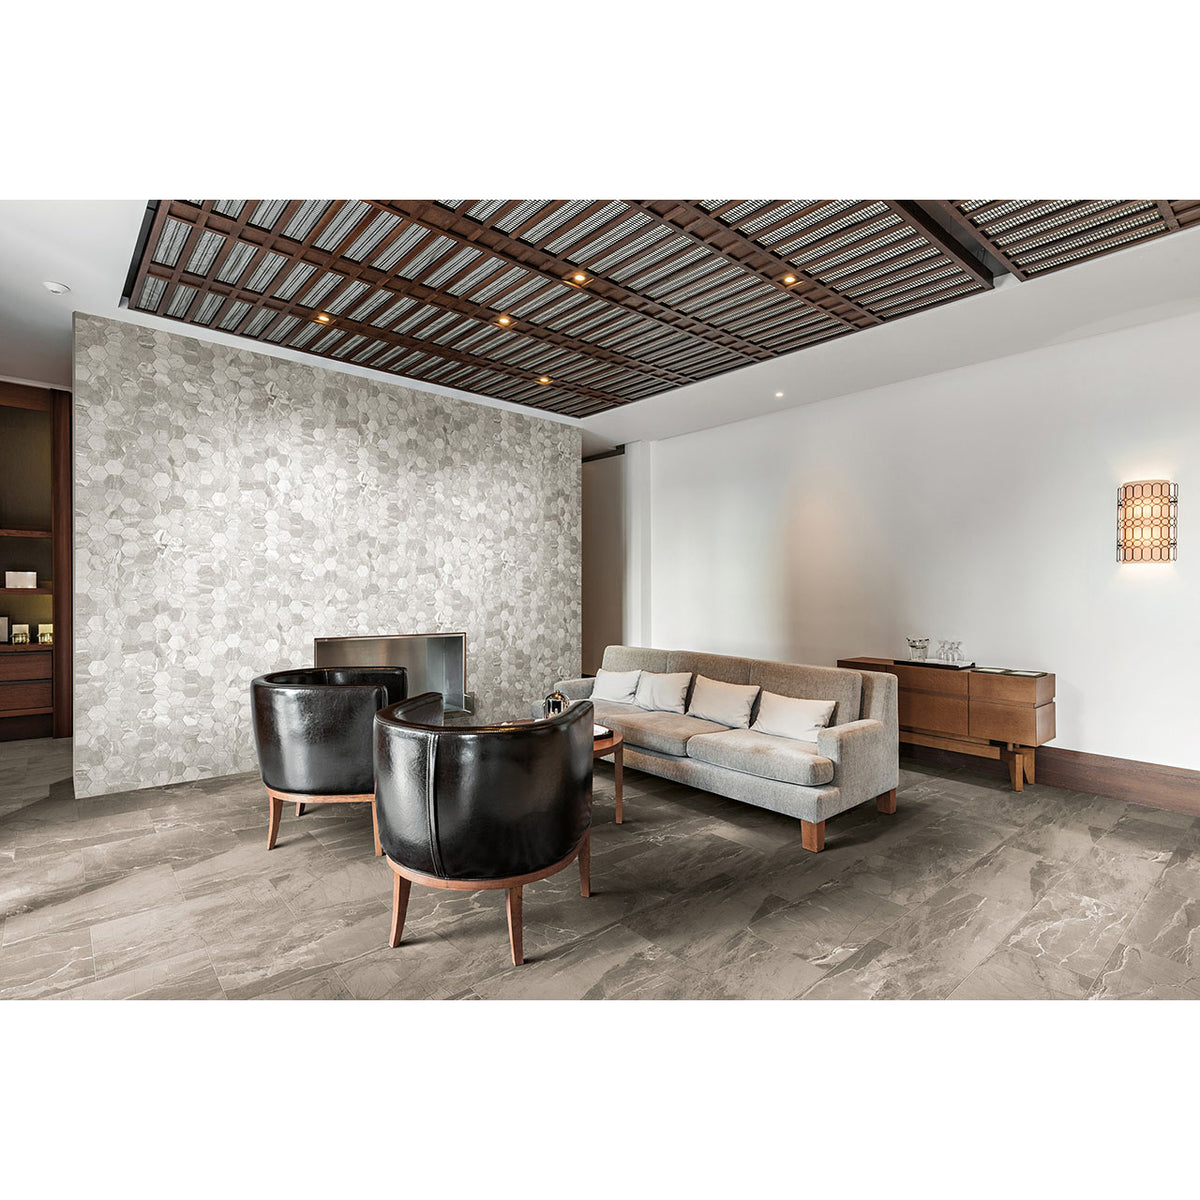 Floors 2000 - Absolute 12 in. x 24 in. Matte Porcelain Tile - Taupe Installed